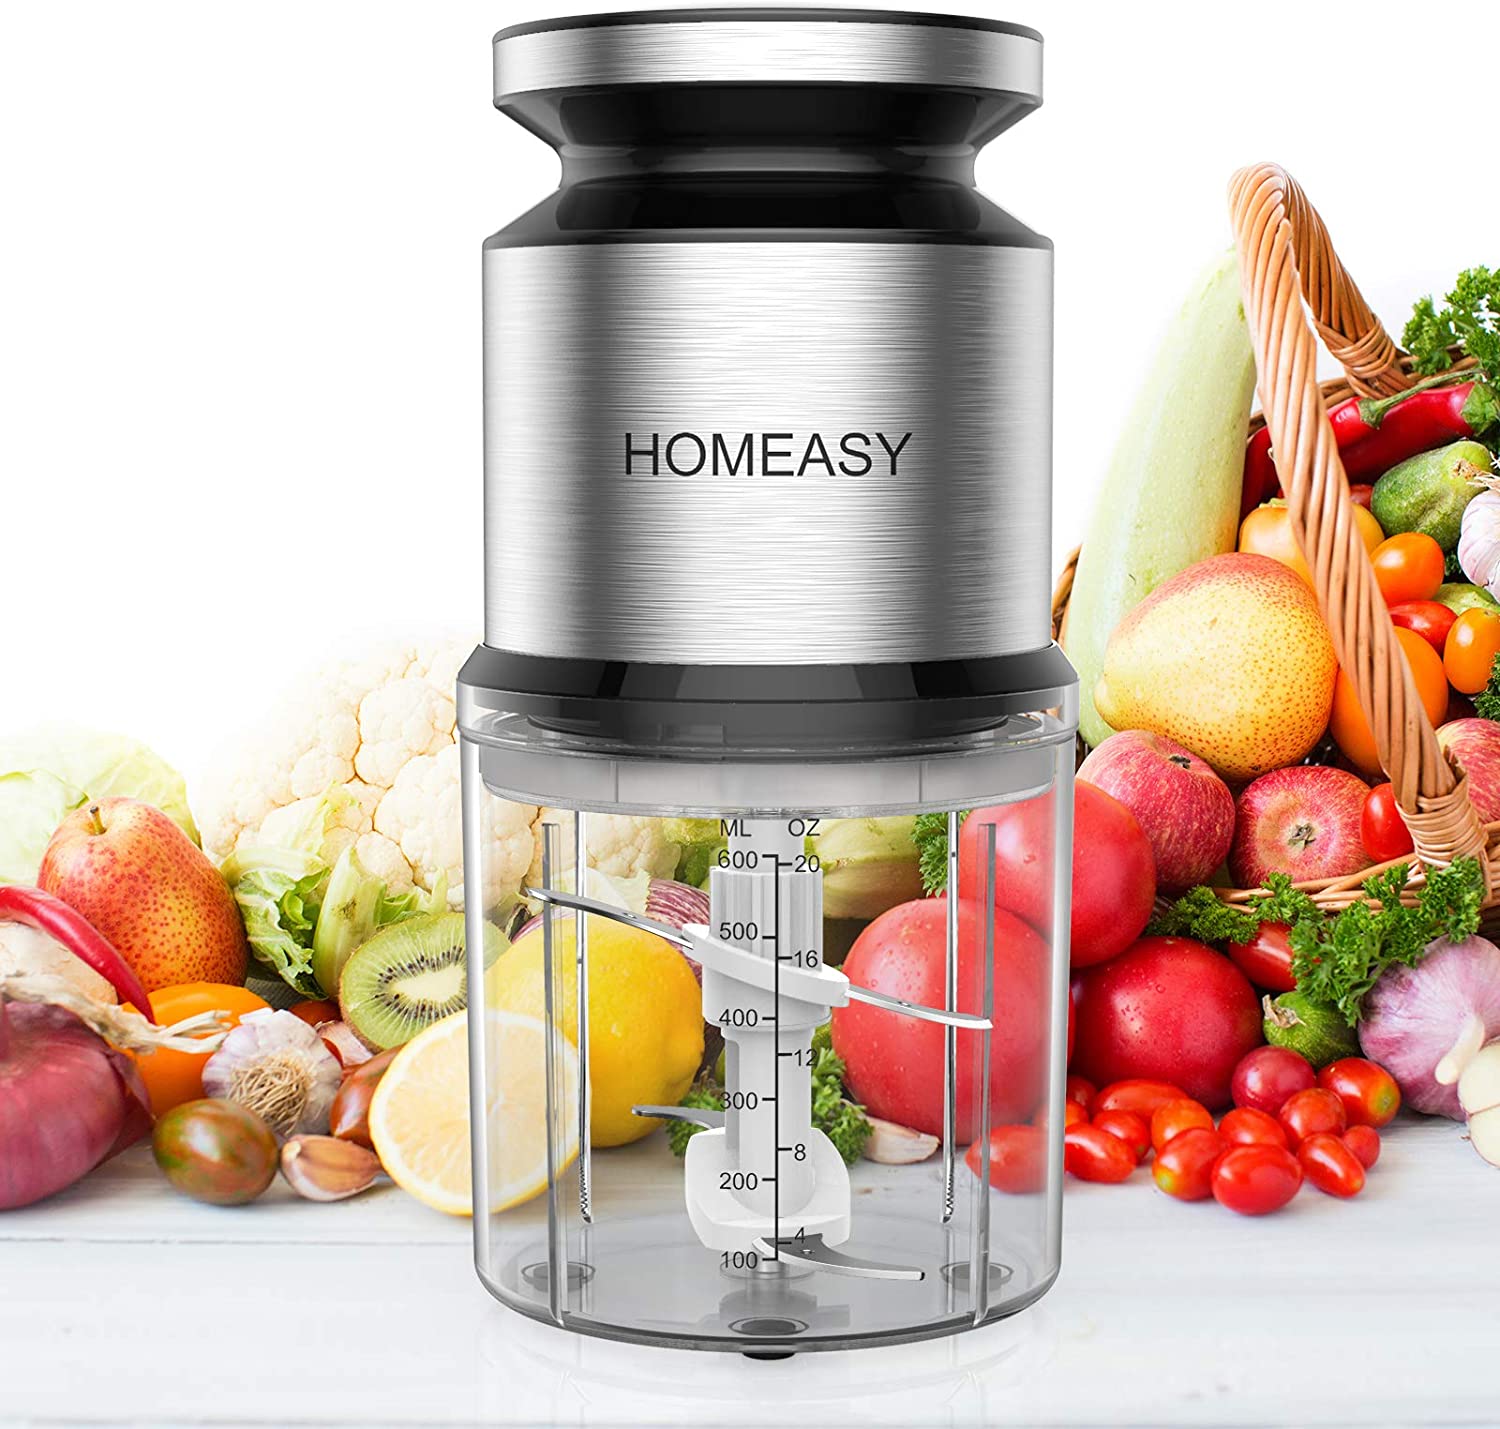 HOMEASY Chopper 0.6 L Universal Chopper 300 W Electric Onion Cutter Handy Mini Multi Chopper with 4 Blades for Meat, Onions, Fruit, Vegetables